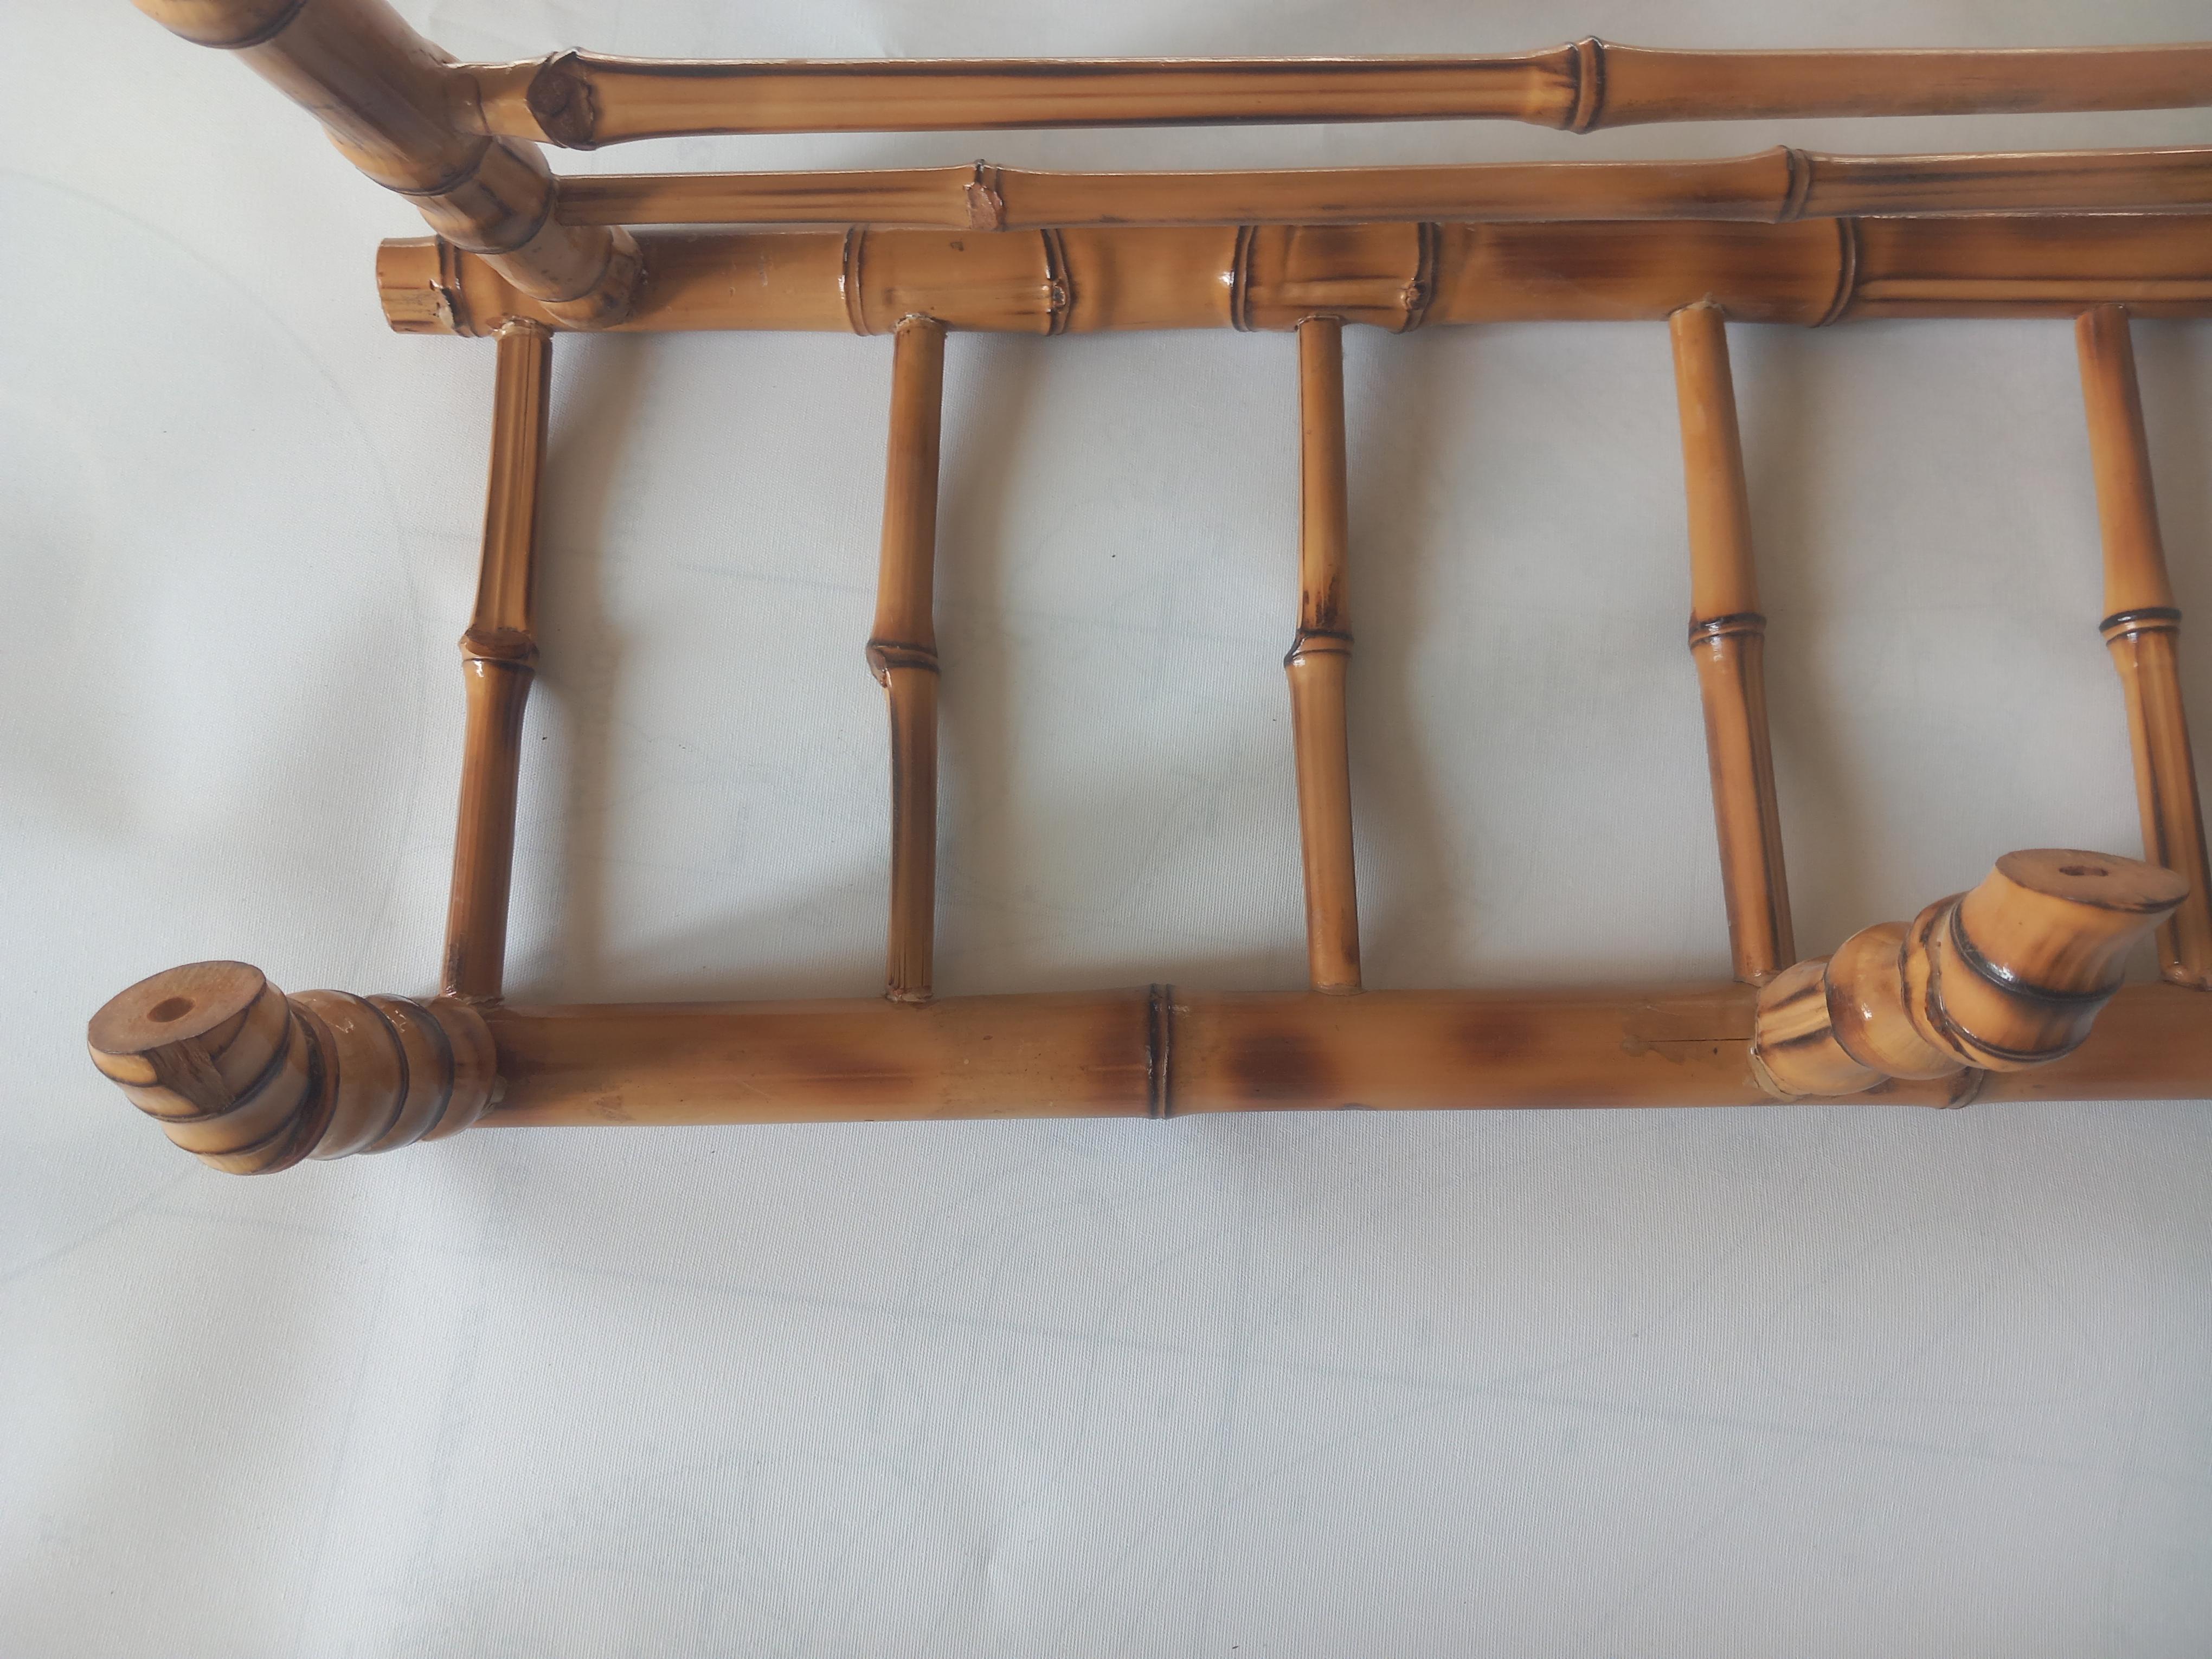 Beautiful Bamboo Coat Rack Three Hangers Top Shelf for Hats or Bags, Spain For Sale 9